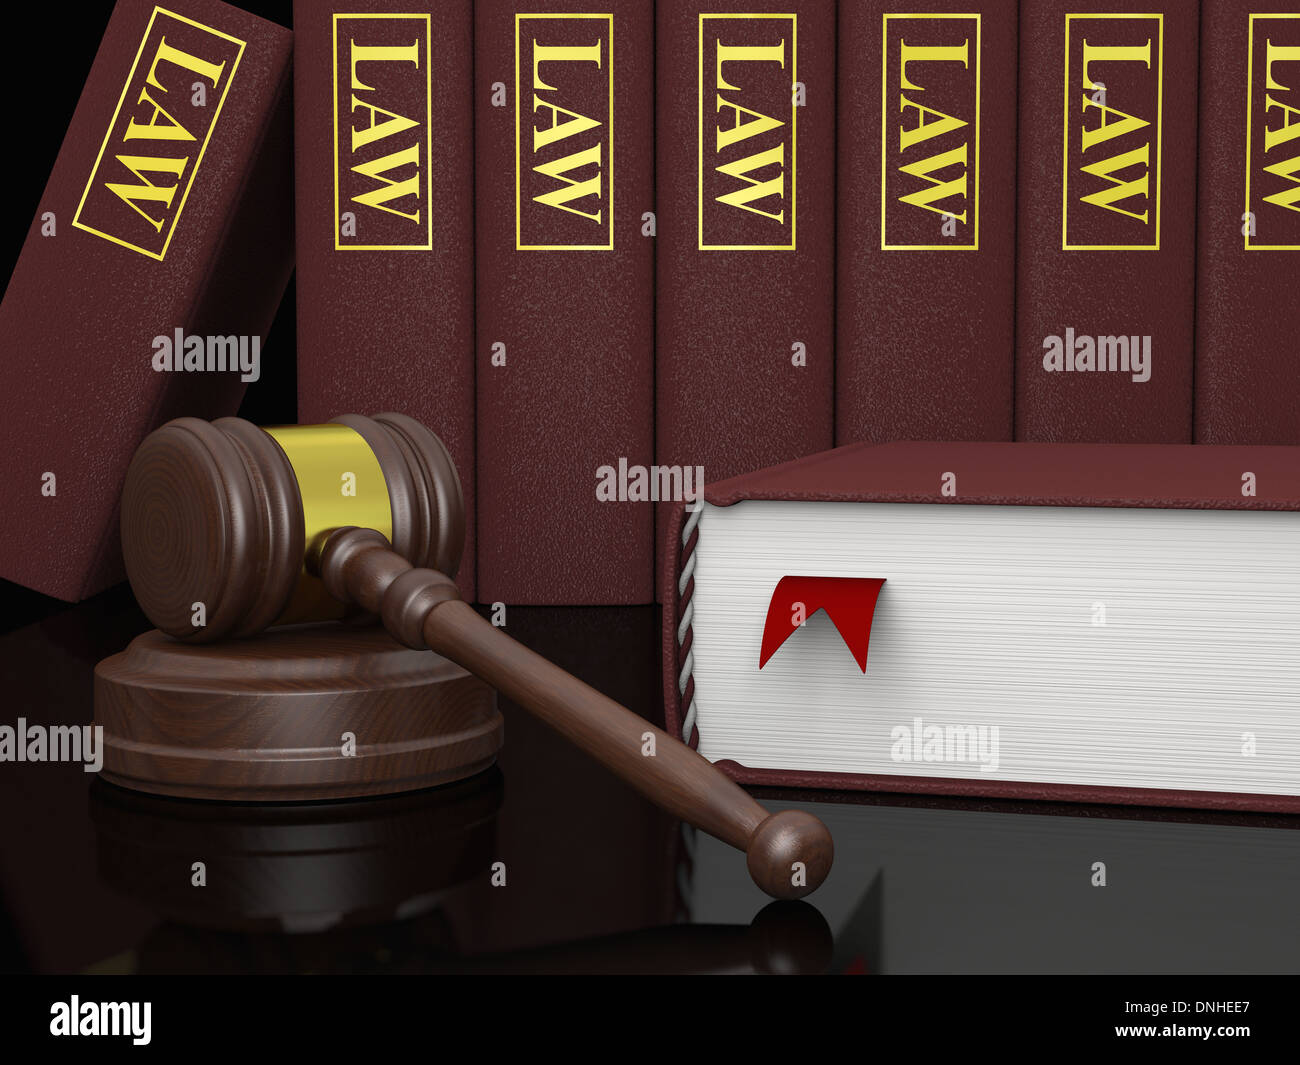 Gavel and law books, symbols of law and legal literature Stock Photo